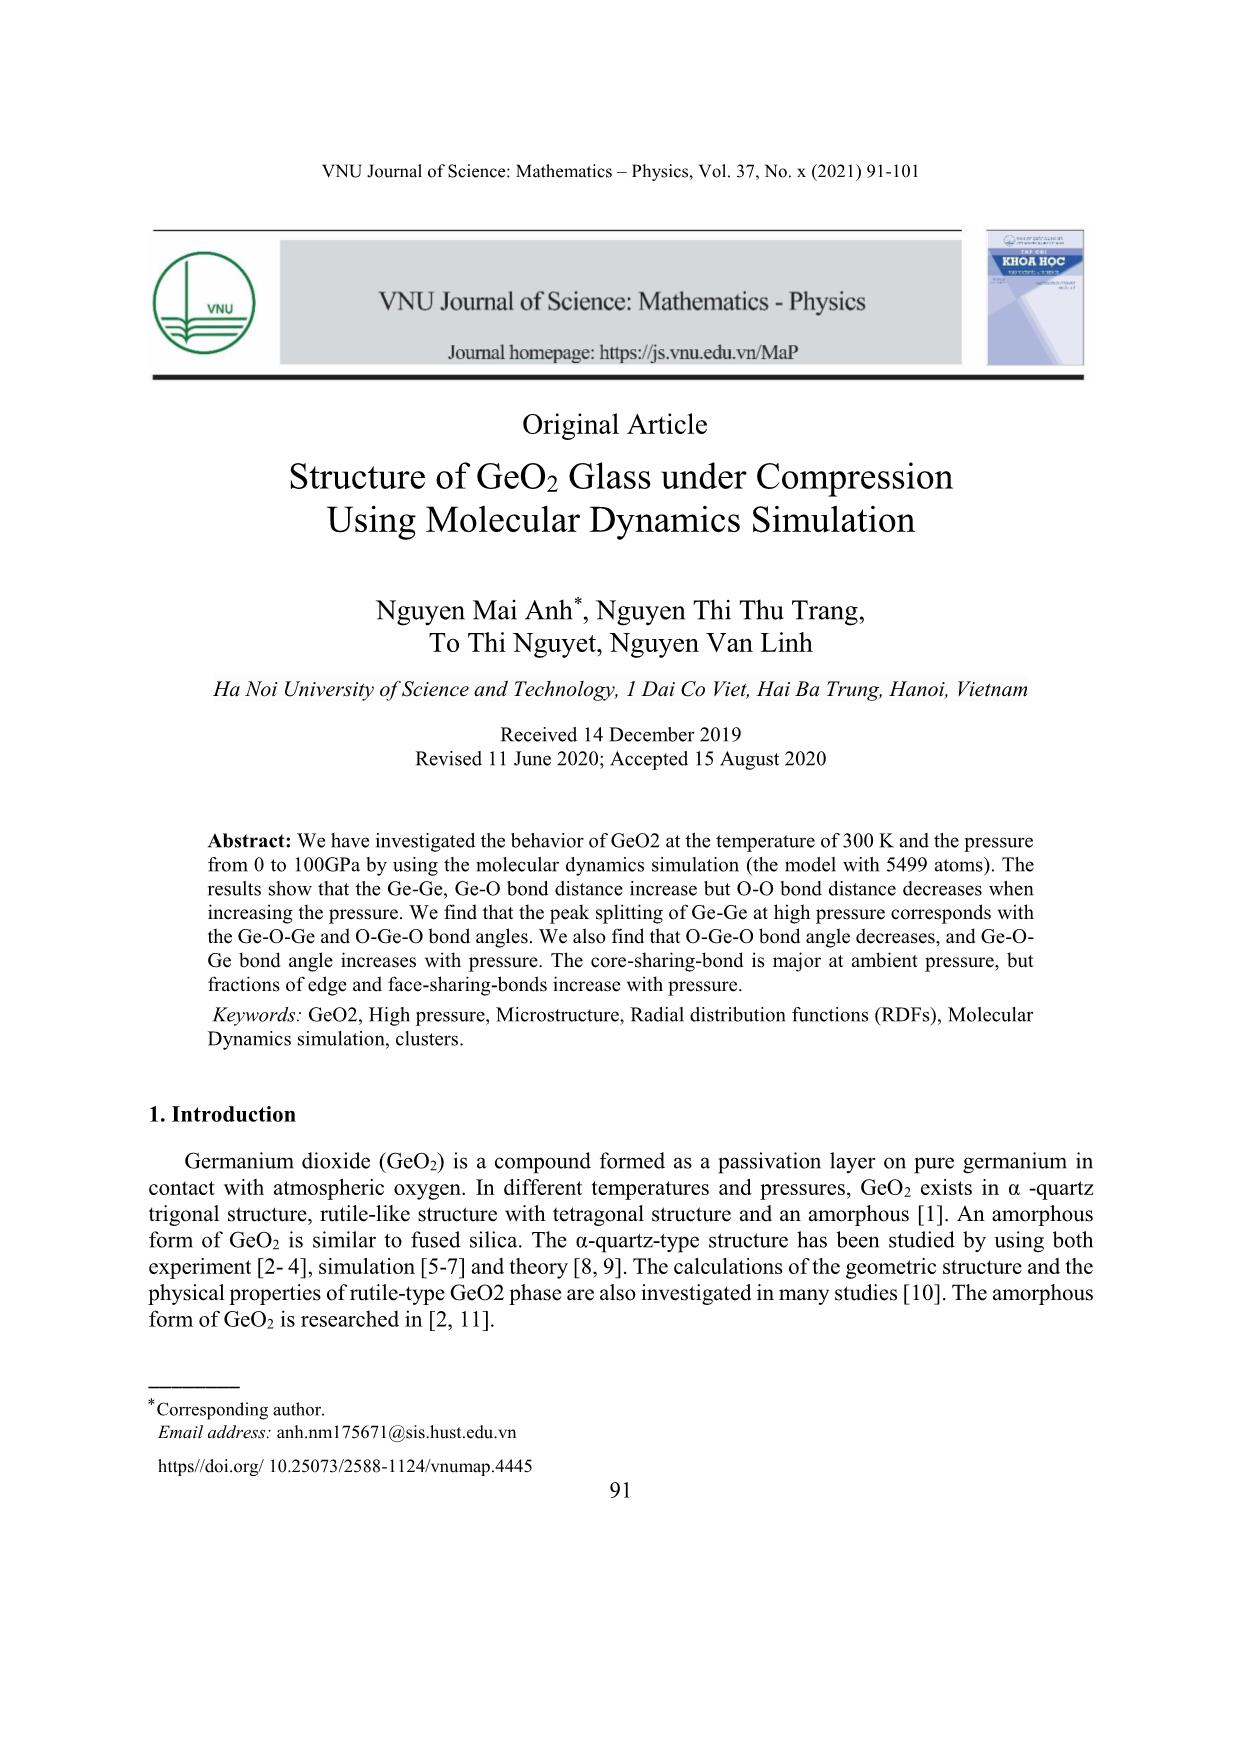 Structure of GeO₂ glass under compression using molecular dynamics simulation trang 1